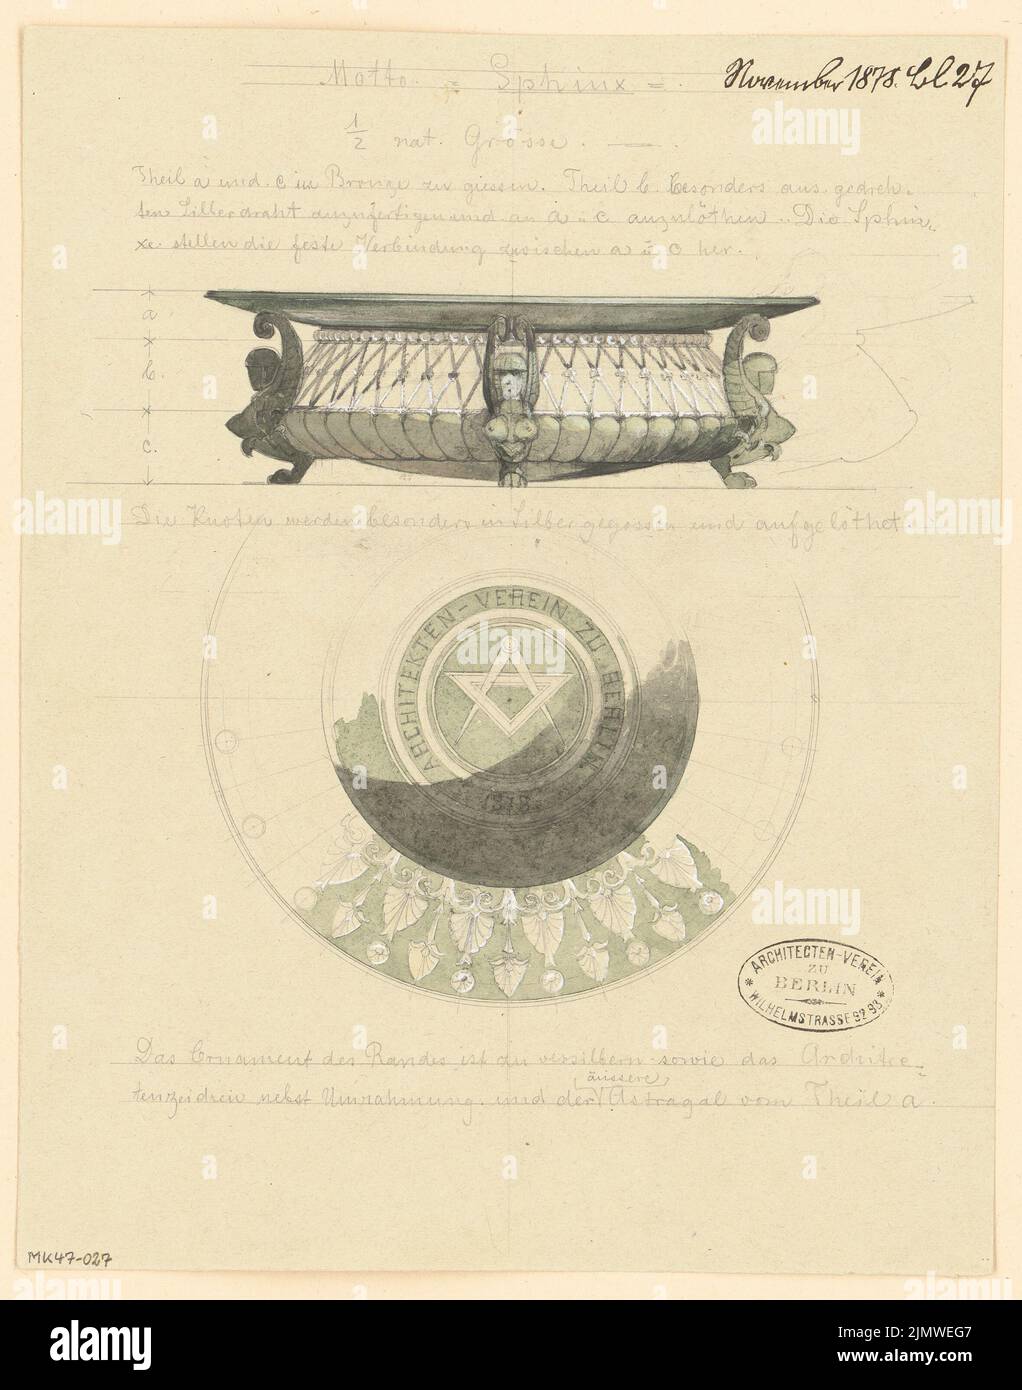 Unknown architect, collection device for ballot papers for the architect association in Berlin. Monthly competition November 1878 (11.1878): View, top view 1: 2 (partially); Explanation text. Pencil watercolored and white heighted on paper, 32 x 25.2 cm (including scan edges) N.N. : Sammelgerät für Stimmzettel für der Architekten-Verein in Berlin. Monatskonkurrenz November 1878 Stock Photo